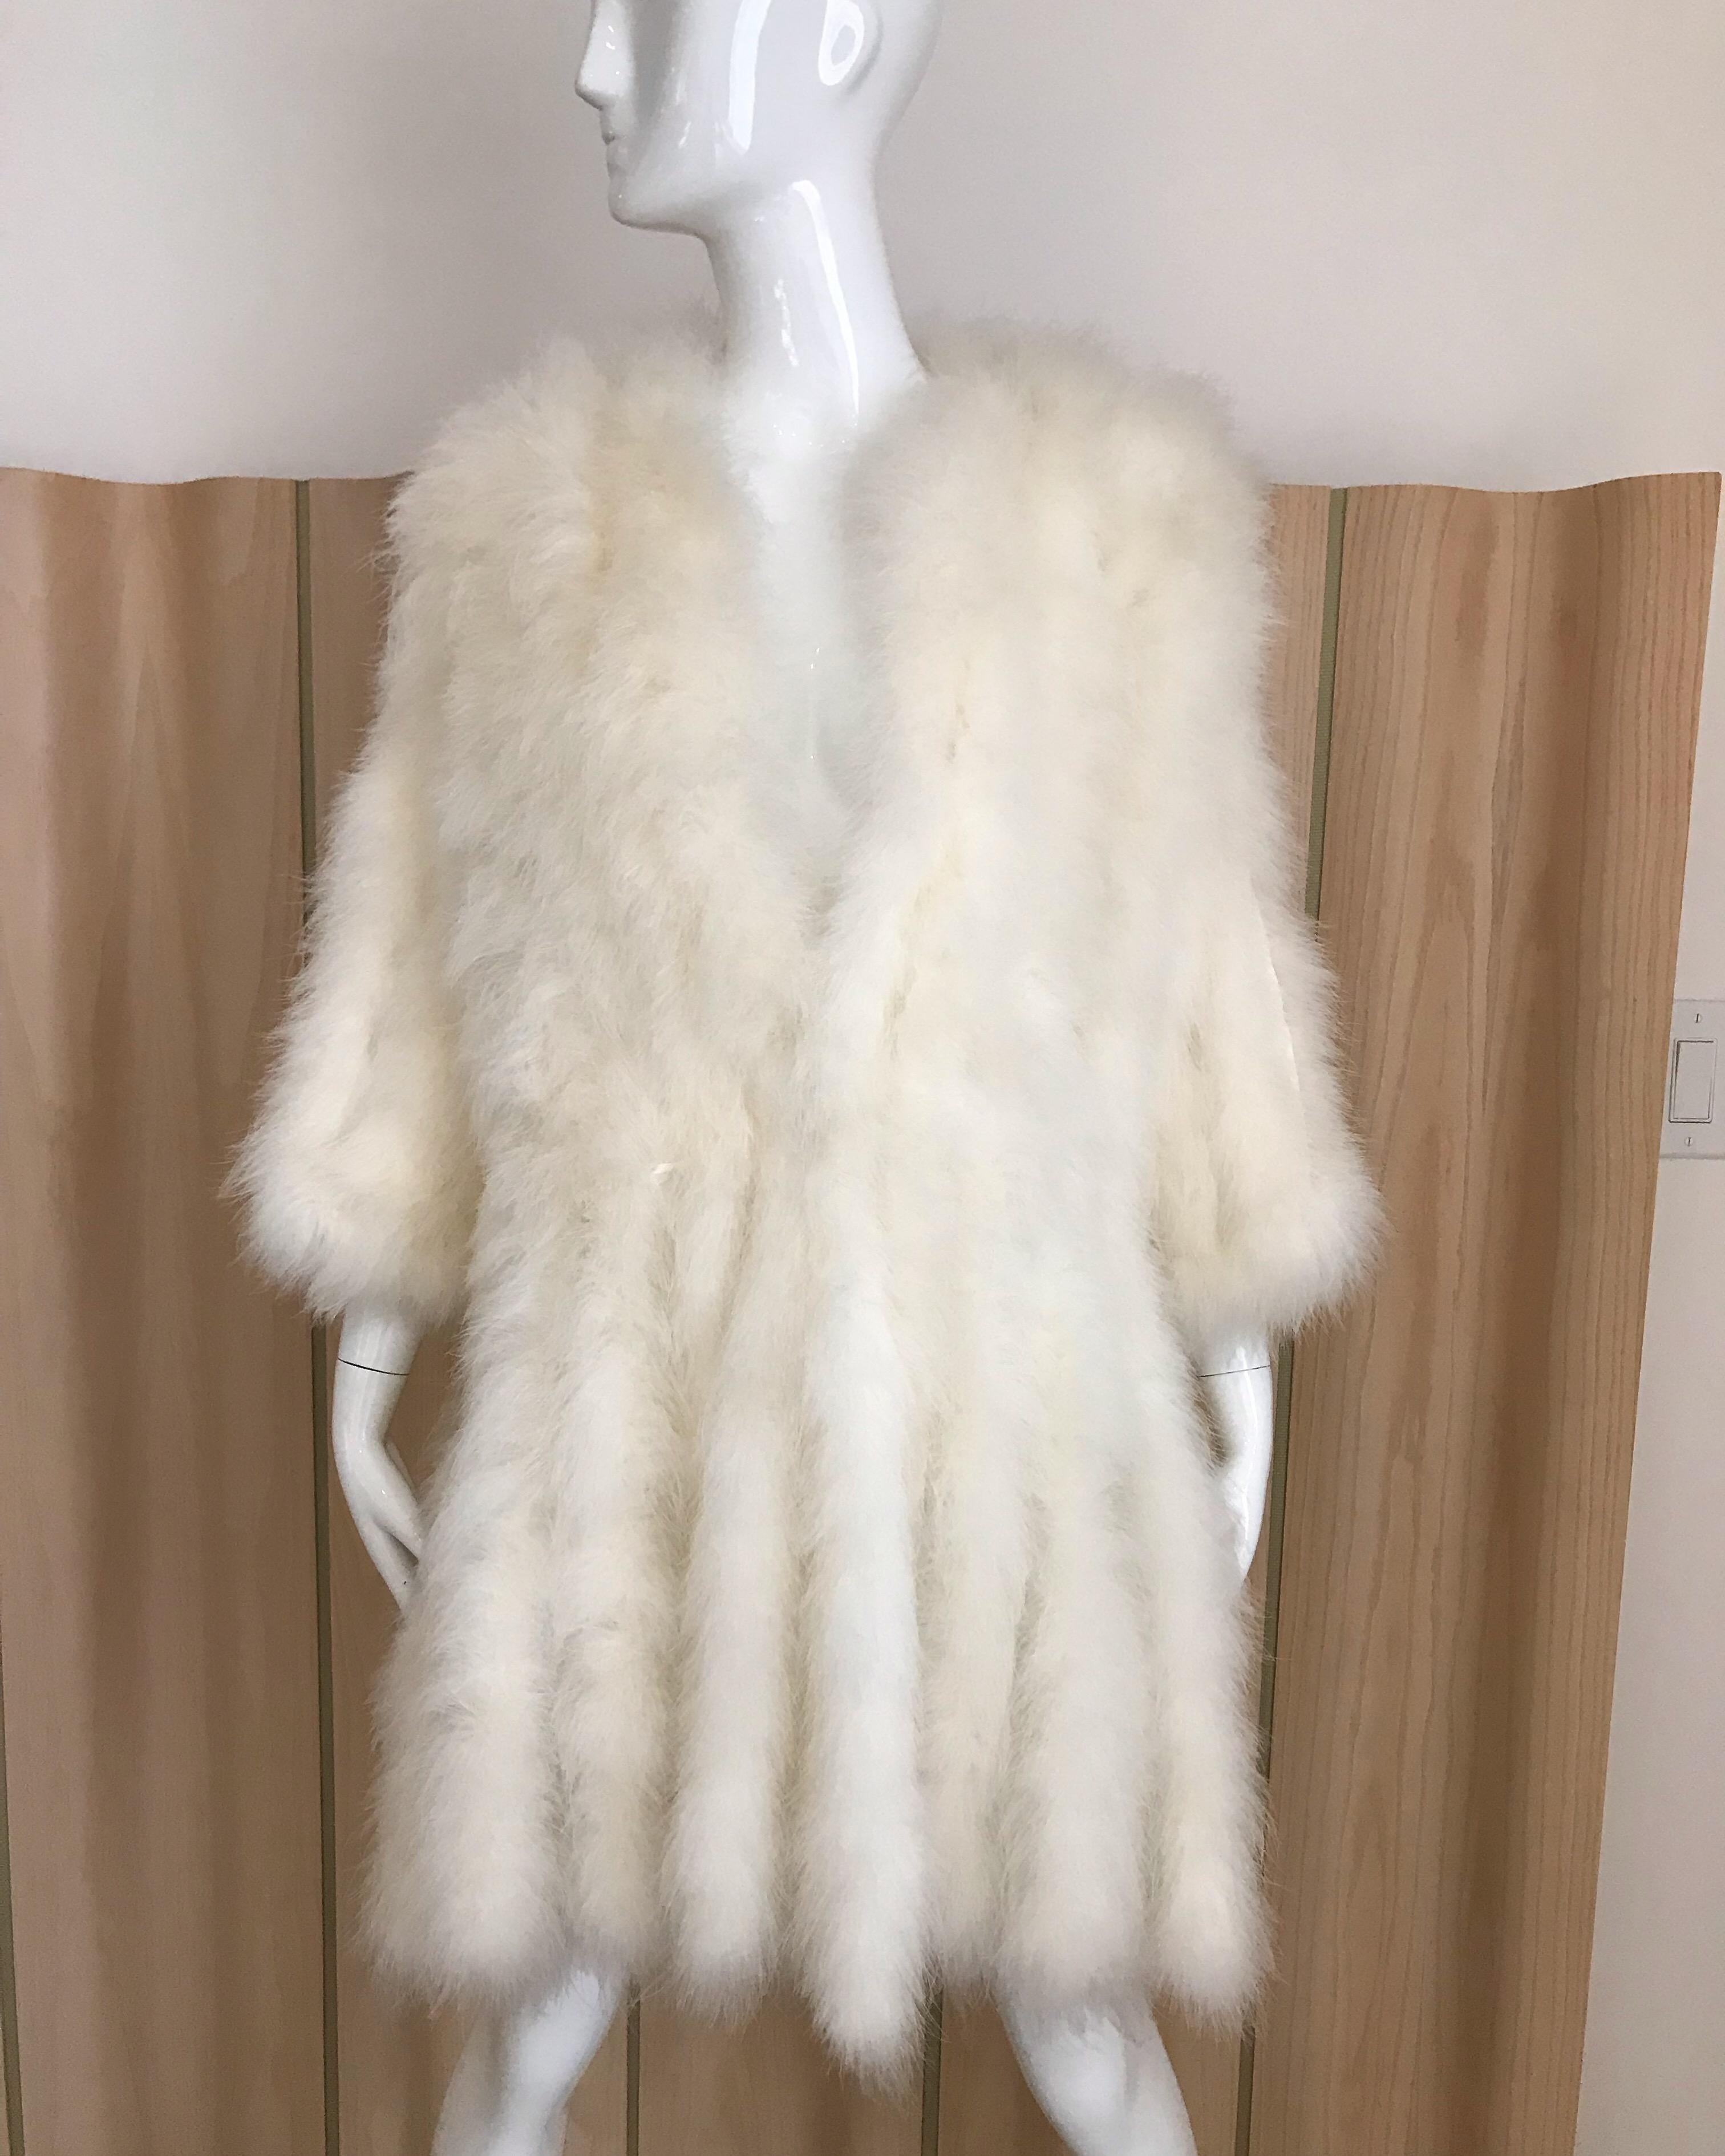 Vintage 1960s Creme Ostrich feathers light coat. Coat is lined. Marked I Magnin.
Size: 8